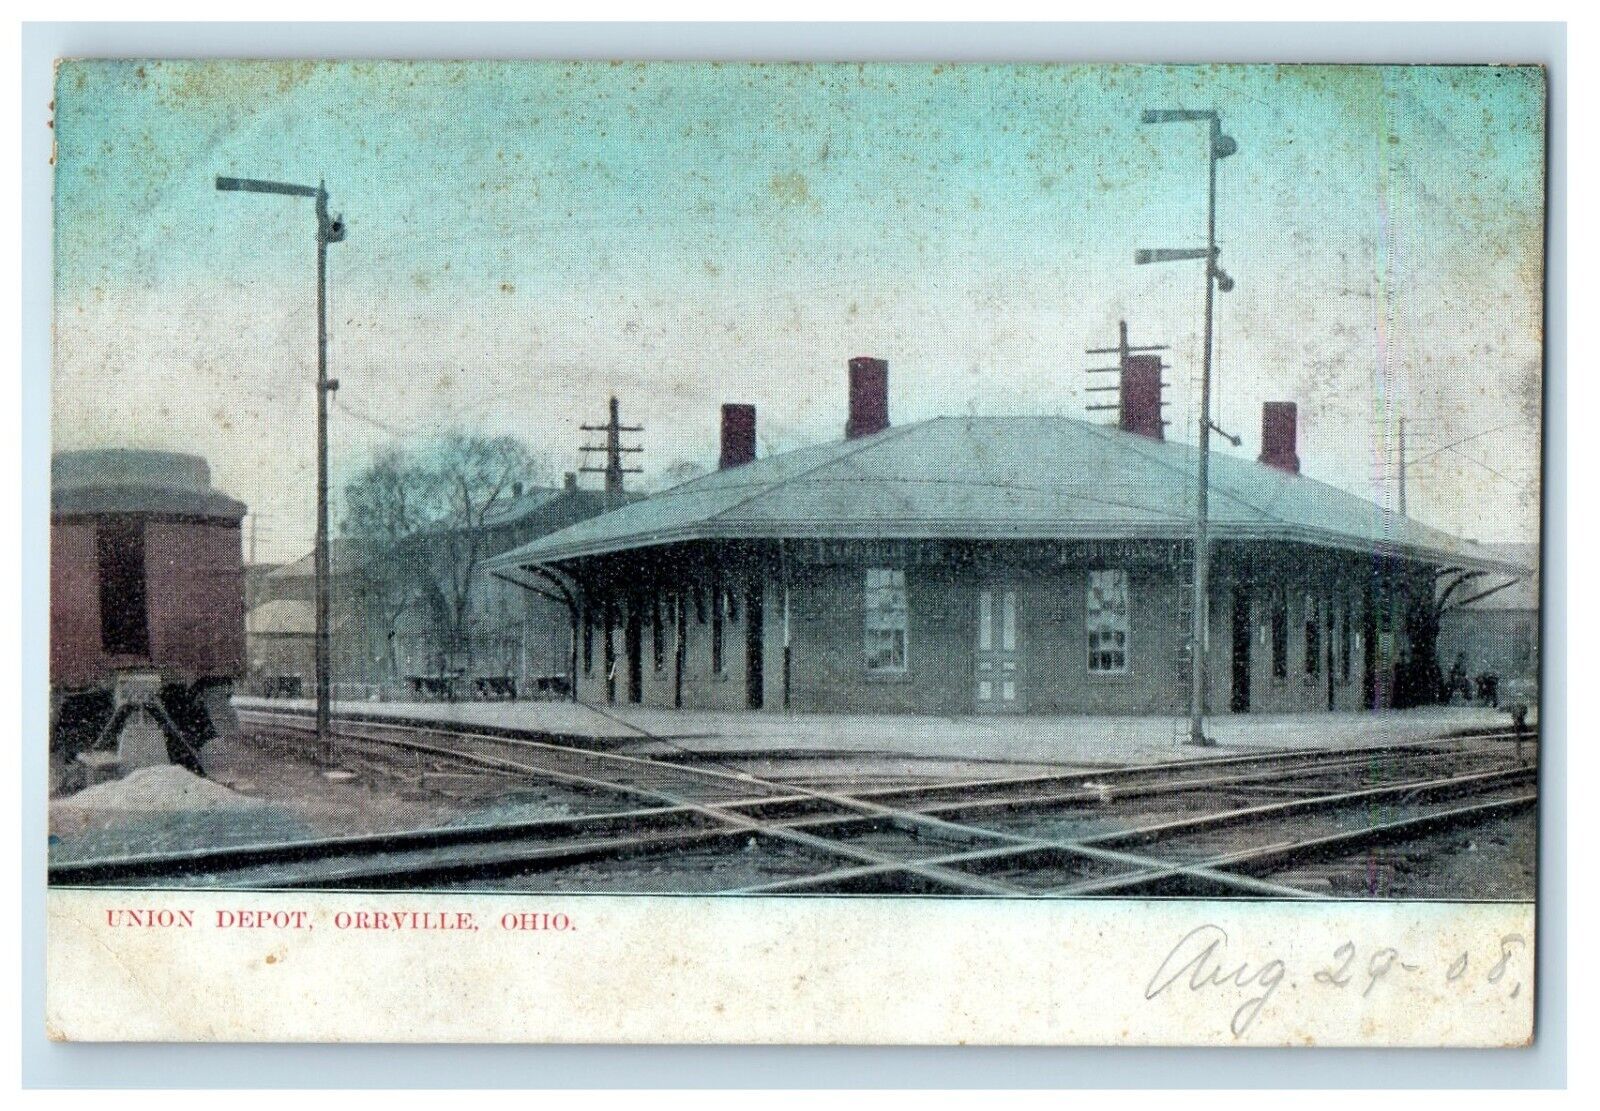 1908 Union Depot Station Railroad Train Orrville Ohio OH Posted Antique Postcard